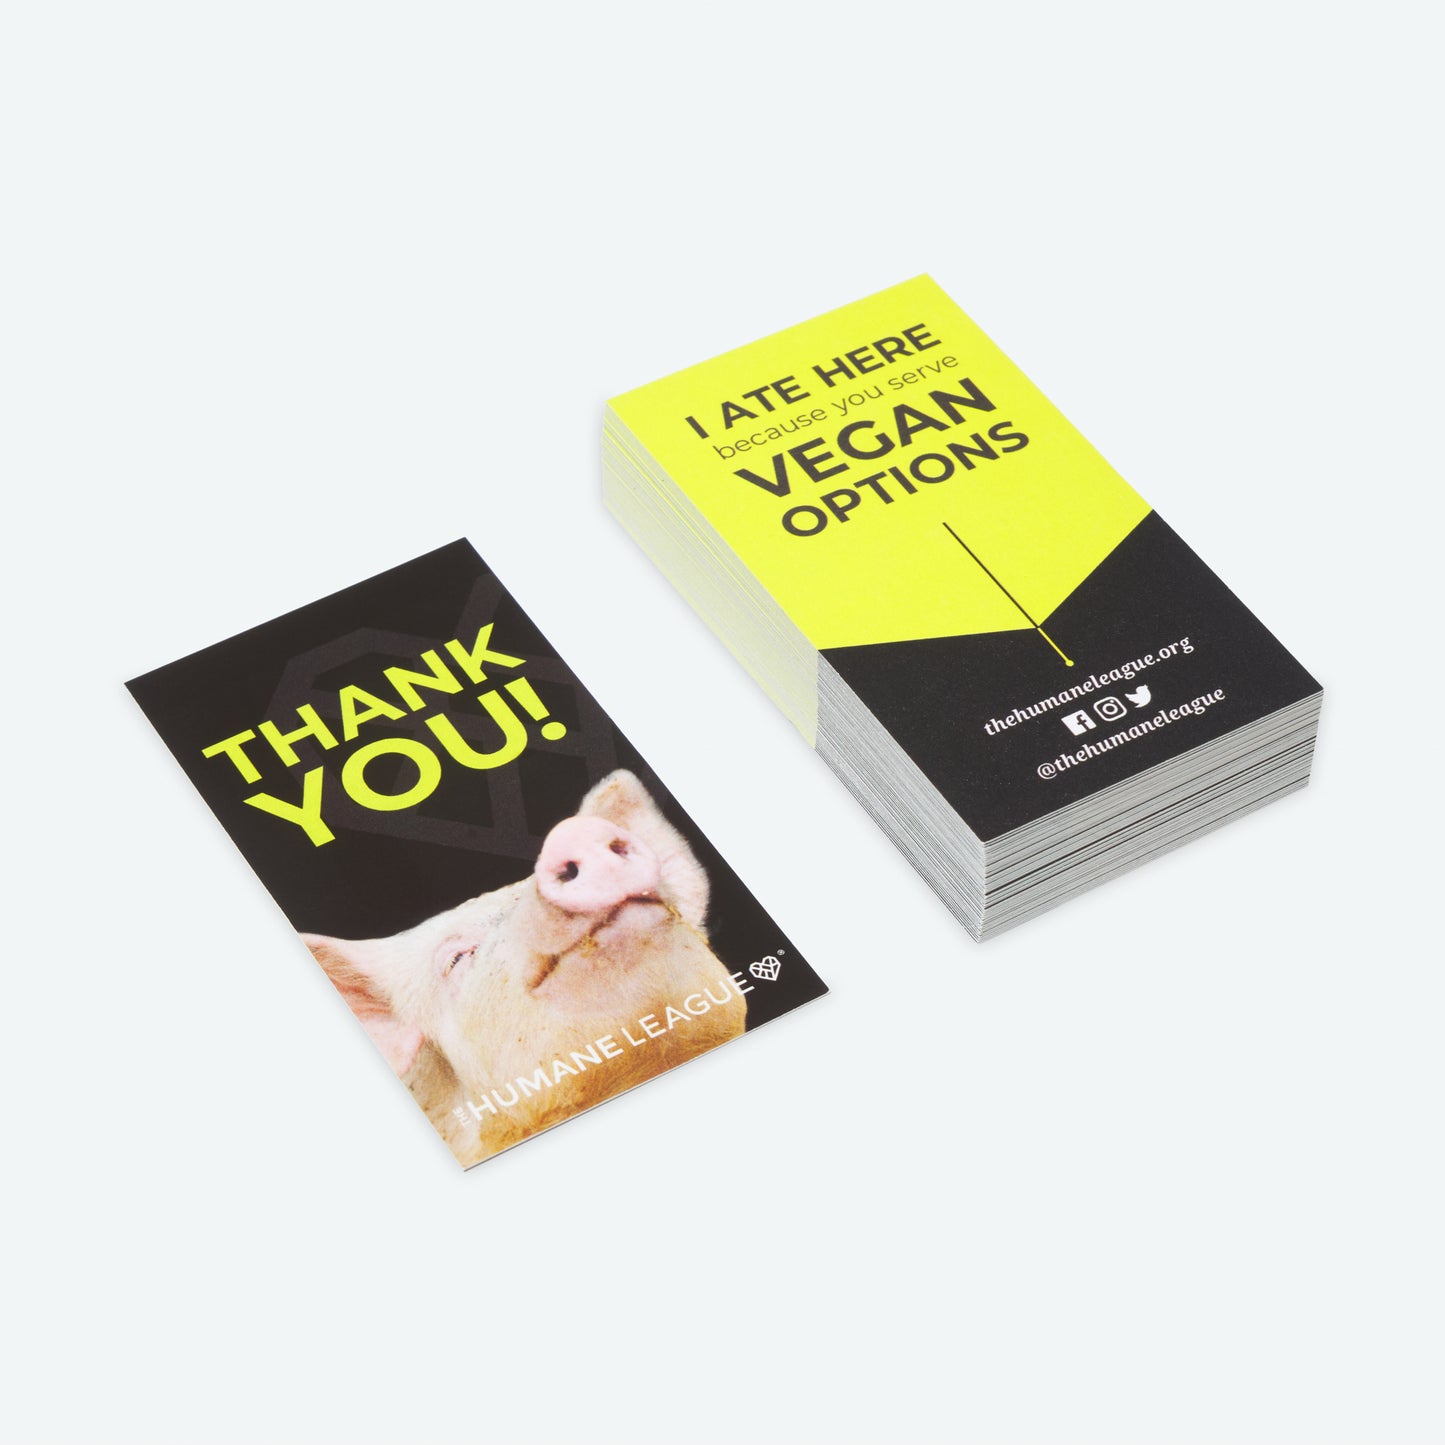 Small stack of business card sized cards. The front of the cards say, "Thank You!" with a photo of the pig. On the back of the cards it says, "I ate here because you serve vegan options".